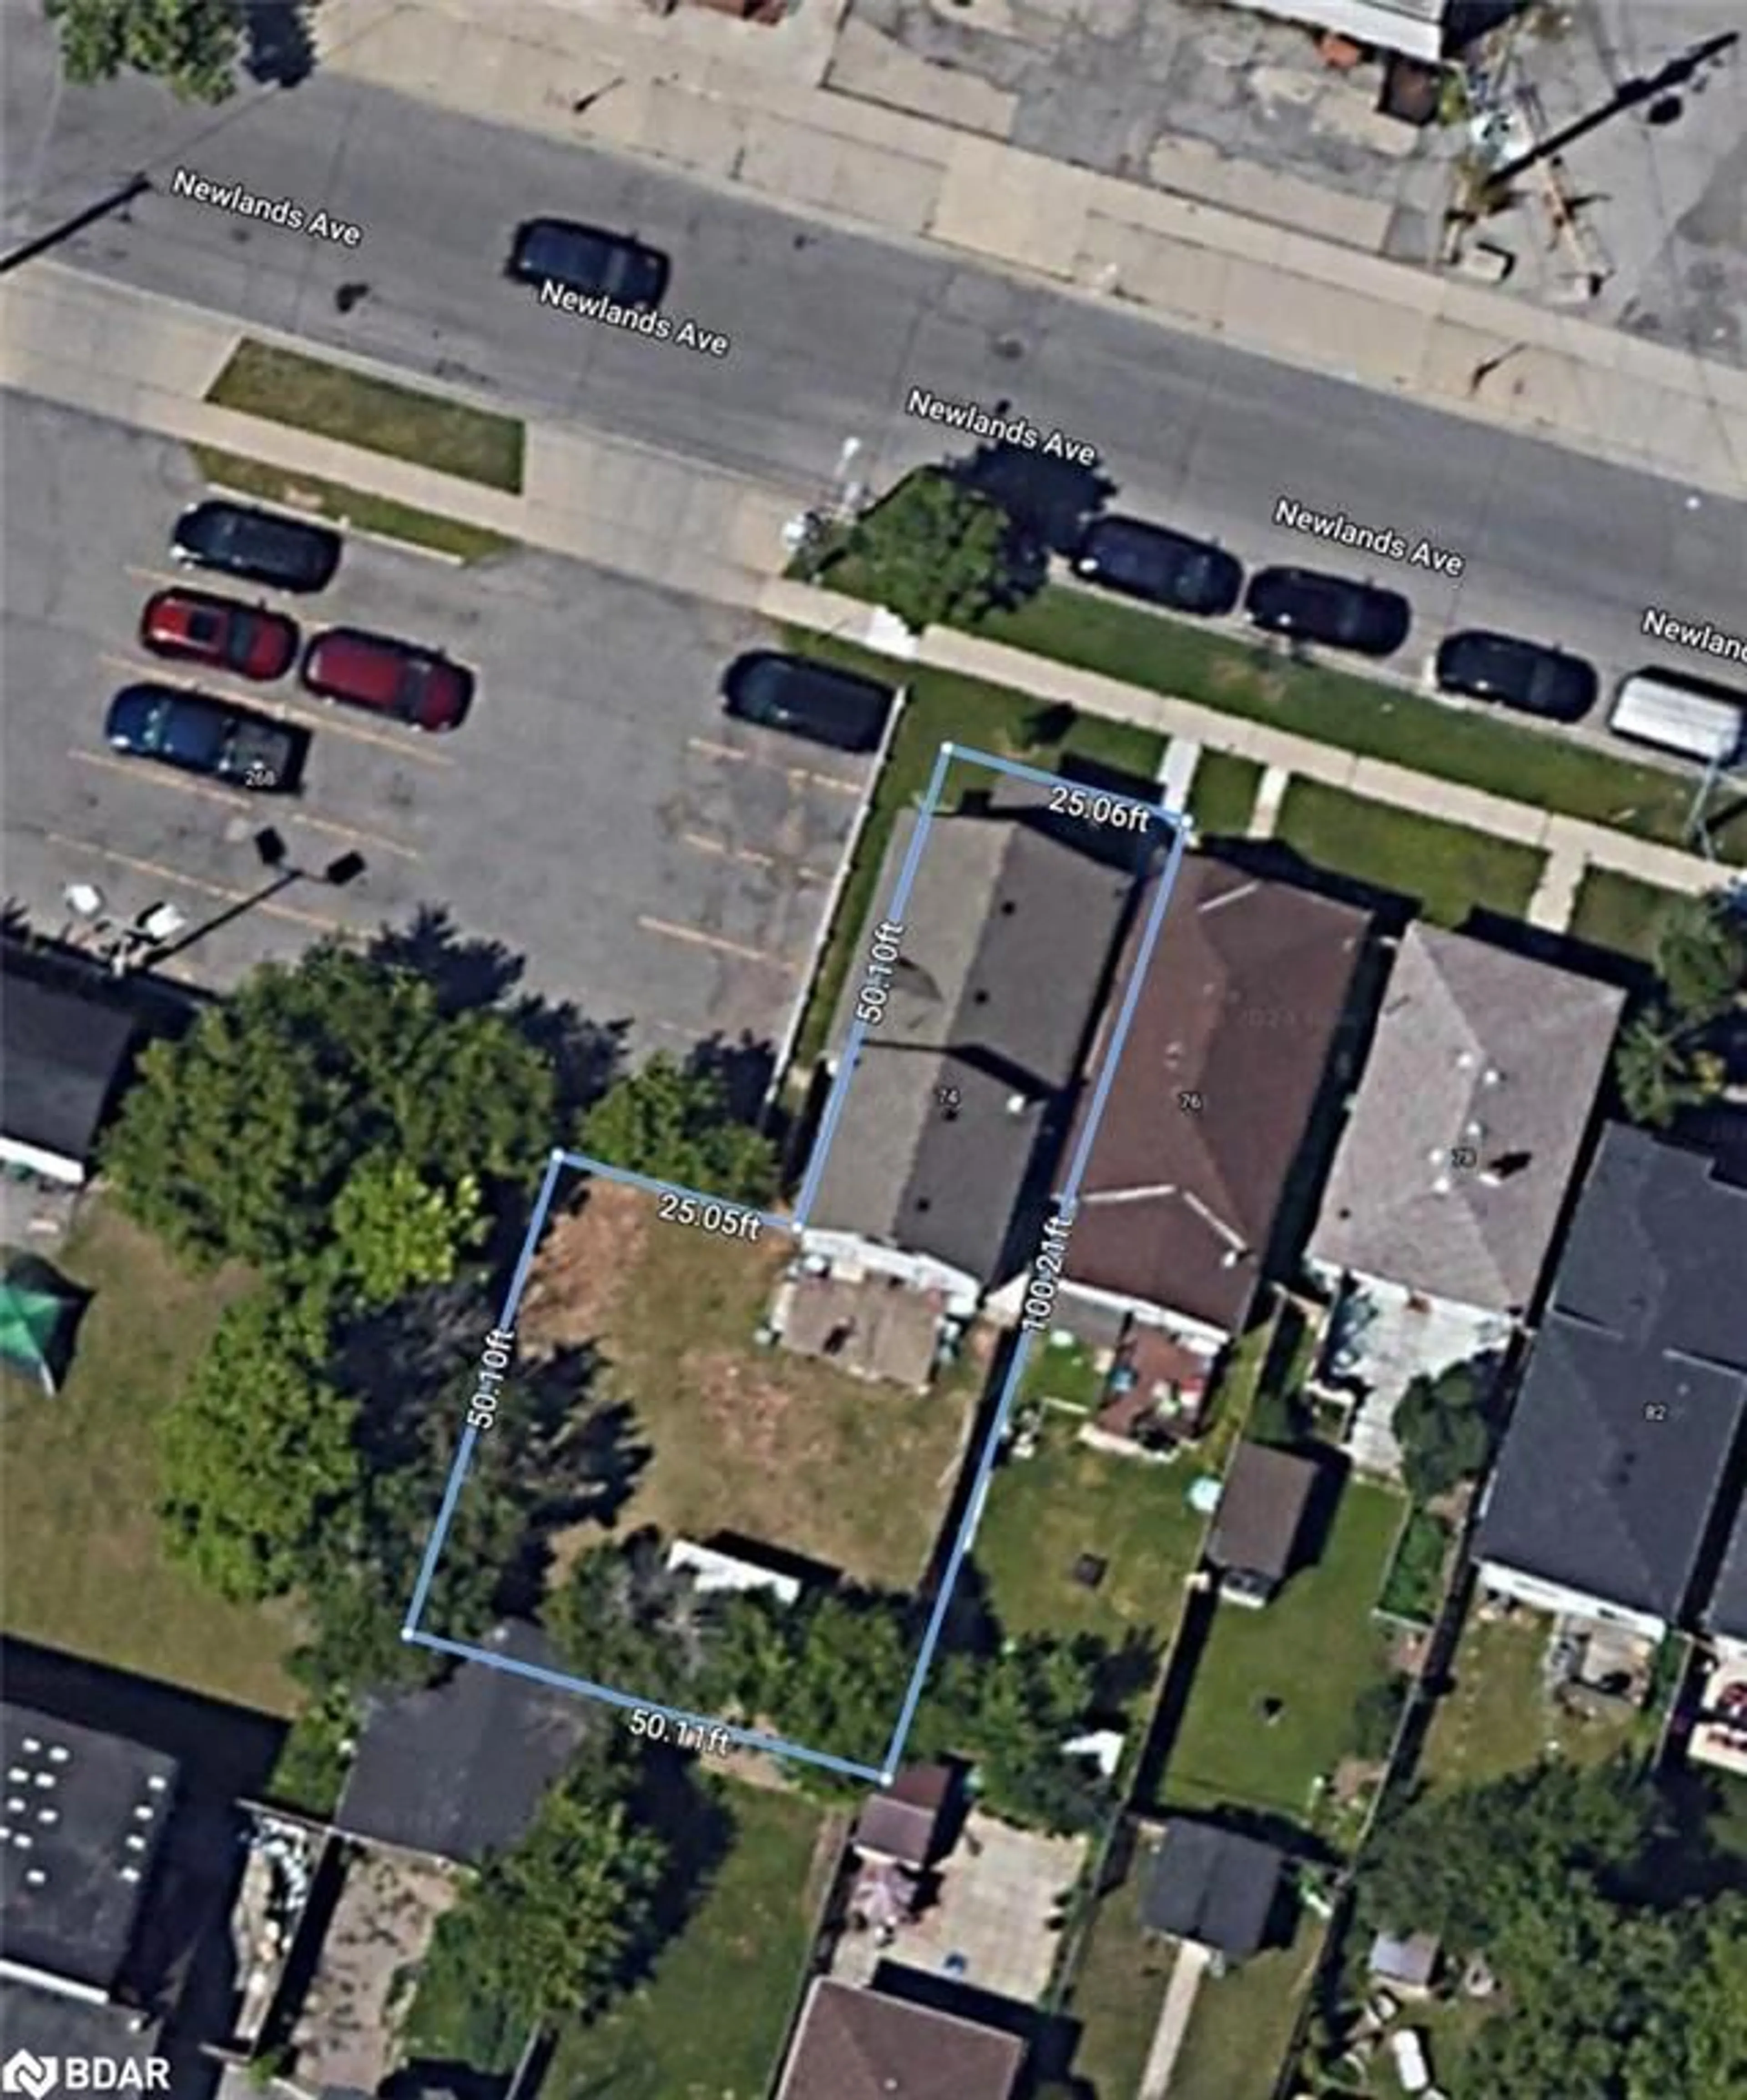 Street view for 74 Newlands Ave, Hamilton Ontario L8H 2T6